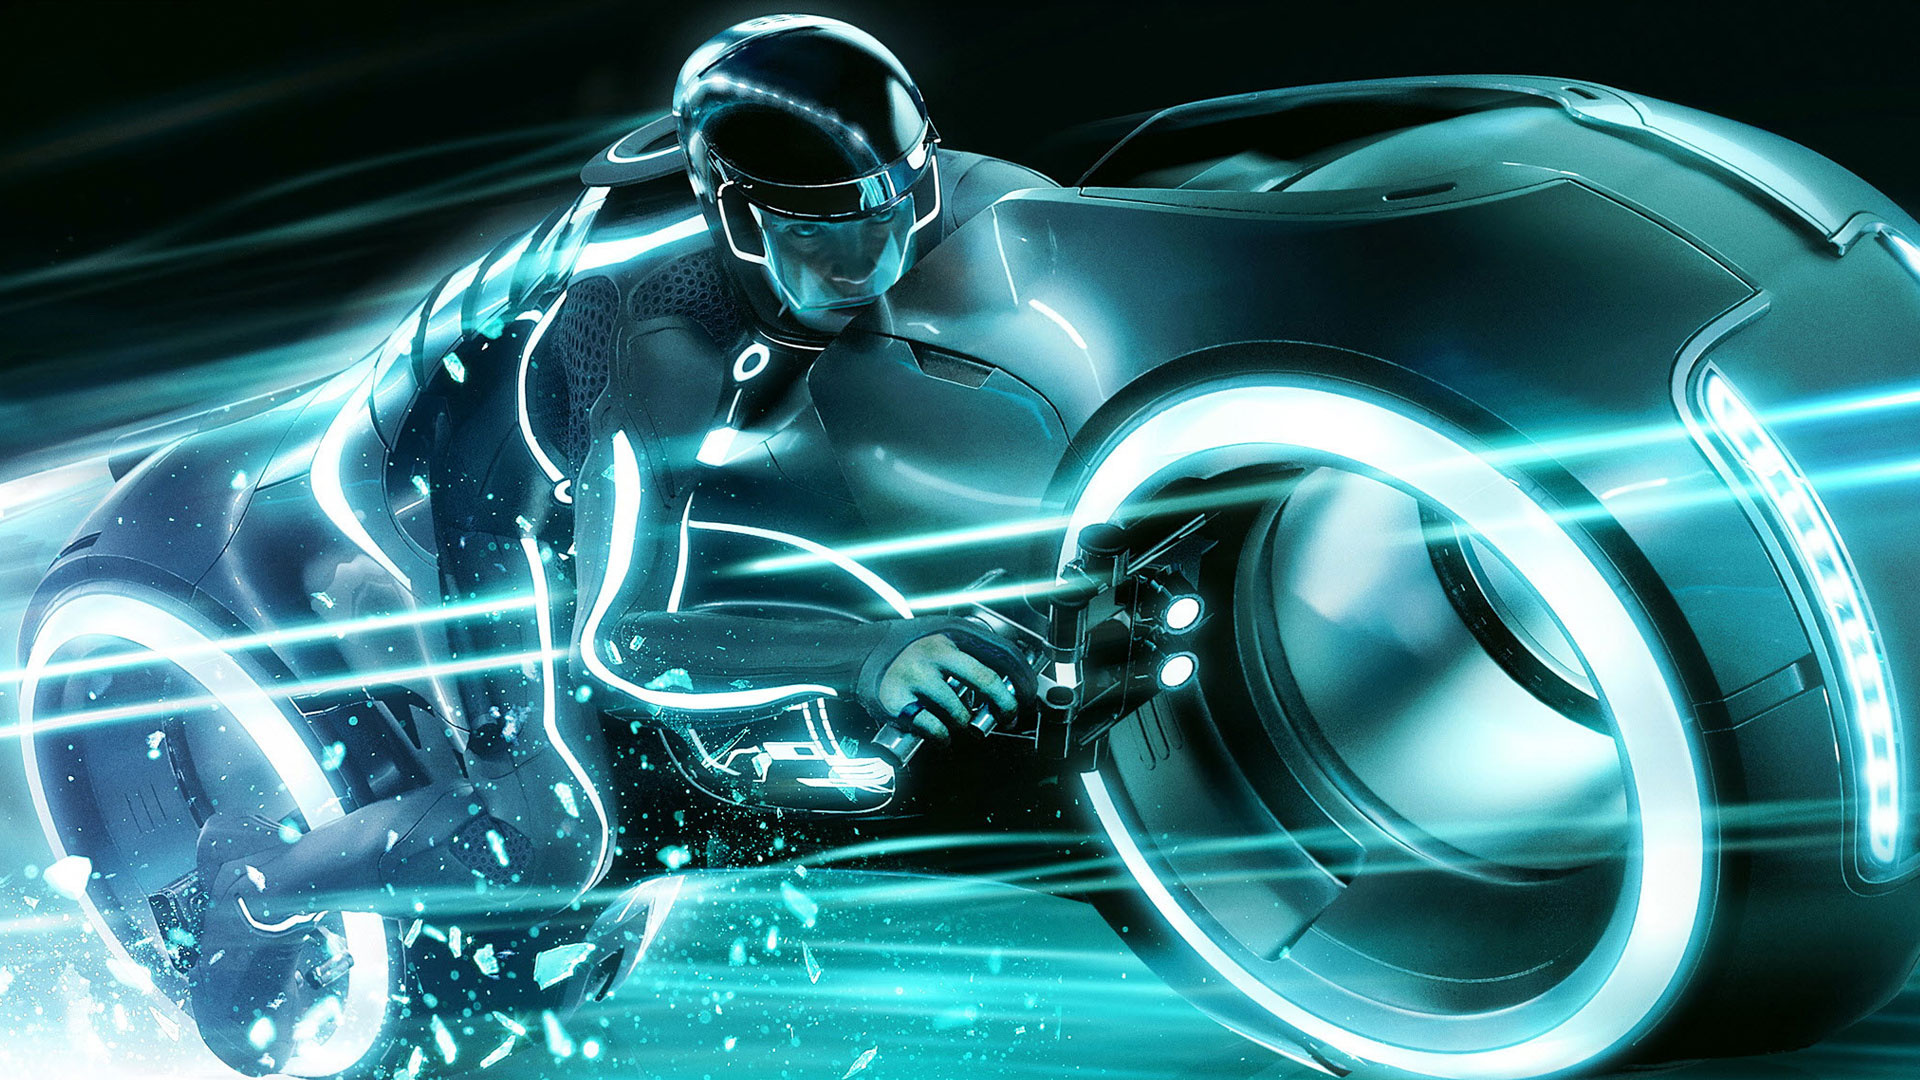 Tron (Movie): Directed by Joseph Kosinski and produced by Steven Lisberger. 1920x1080 Full HD Wallpaper.